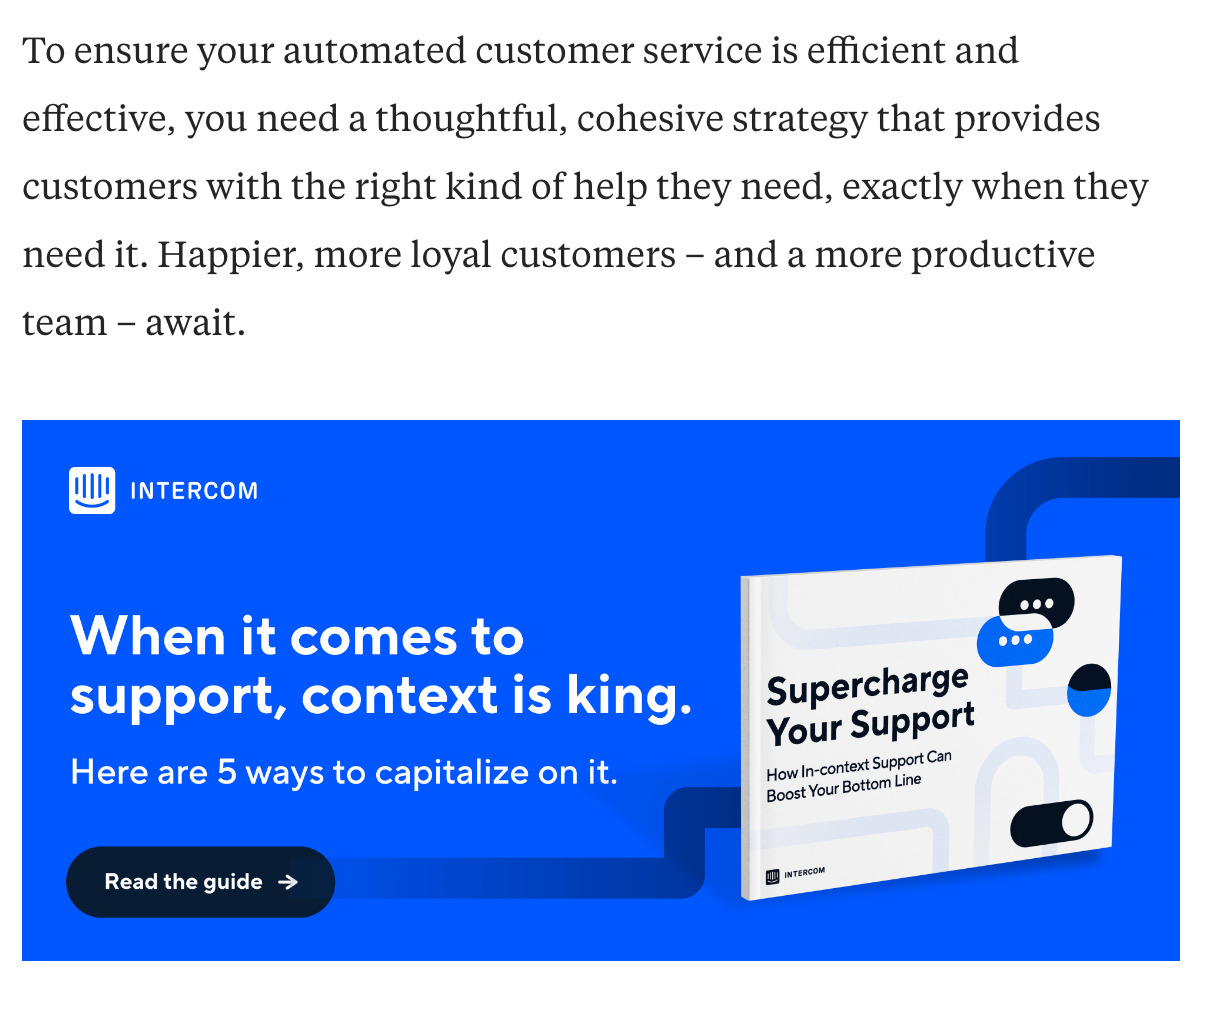 Intercom offers a free guide in return for subscribing 